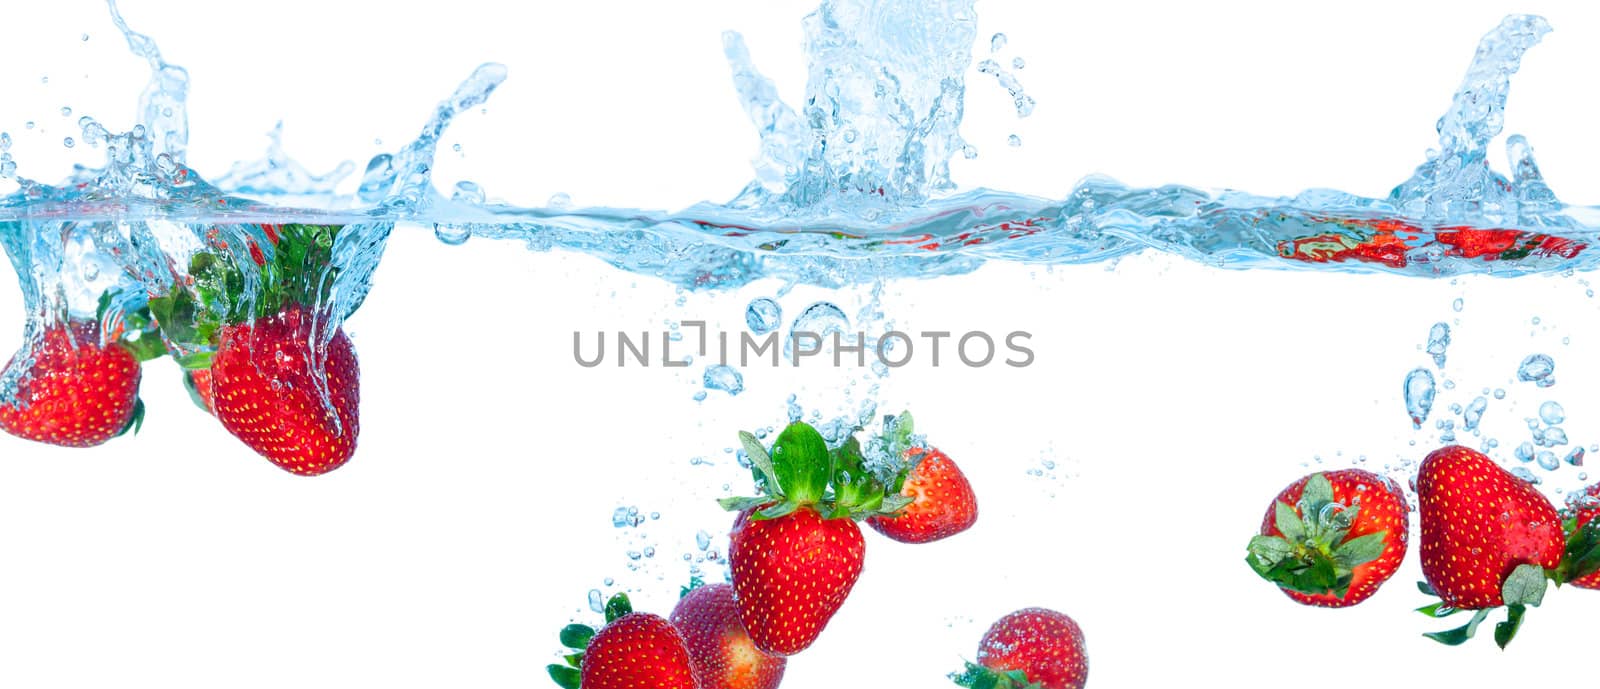 Collage Fresh Strawberry Dropped into Water with Splash by Discovod